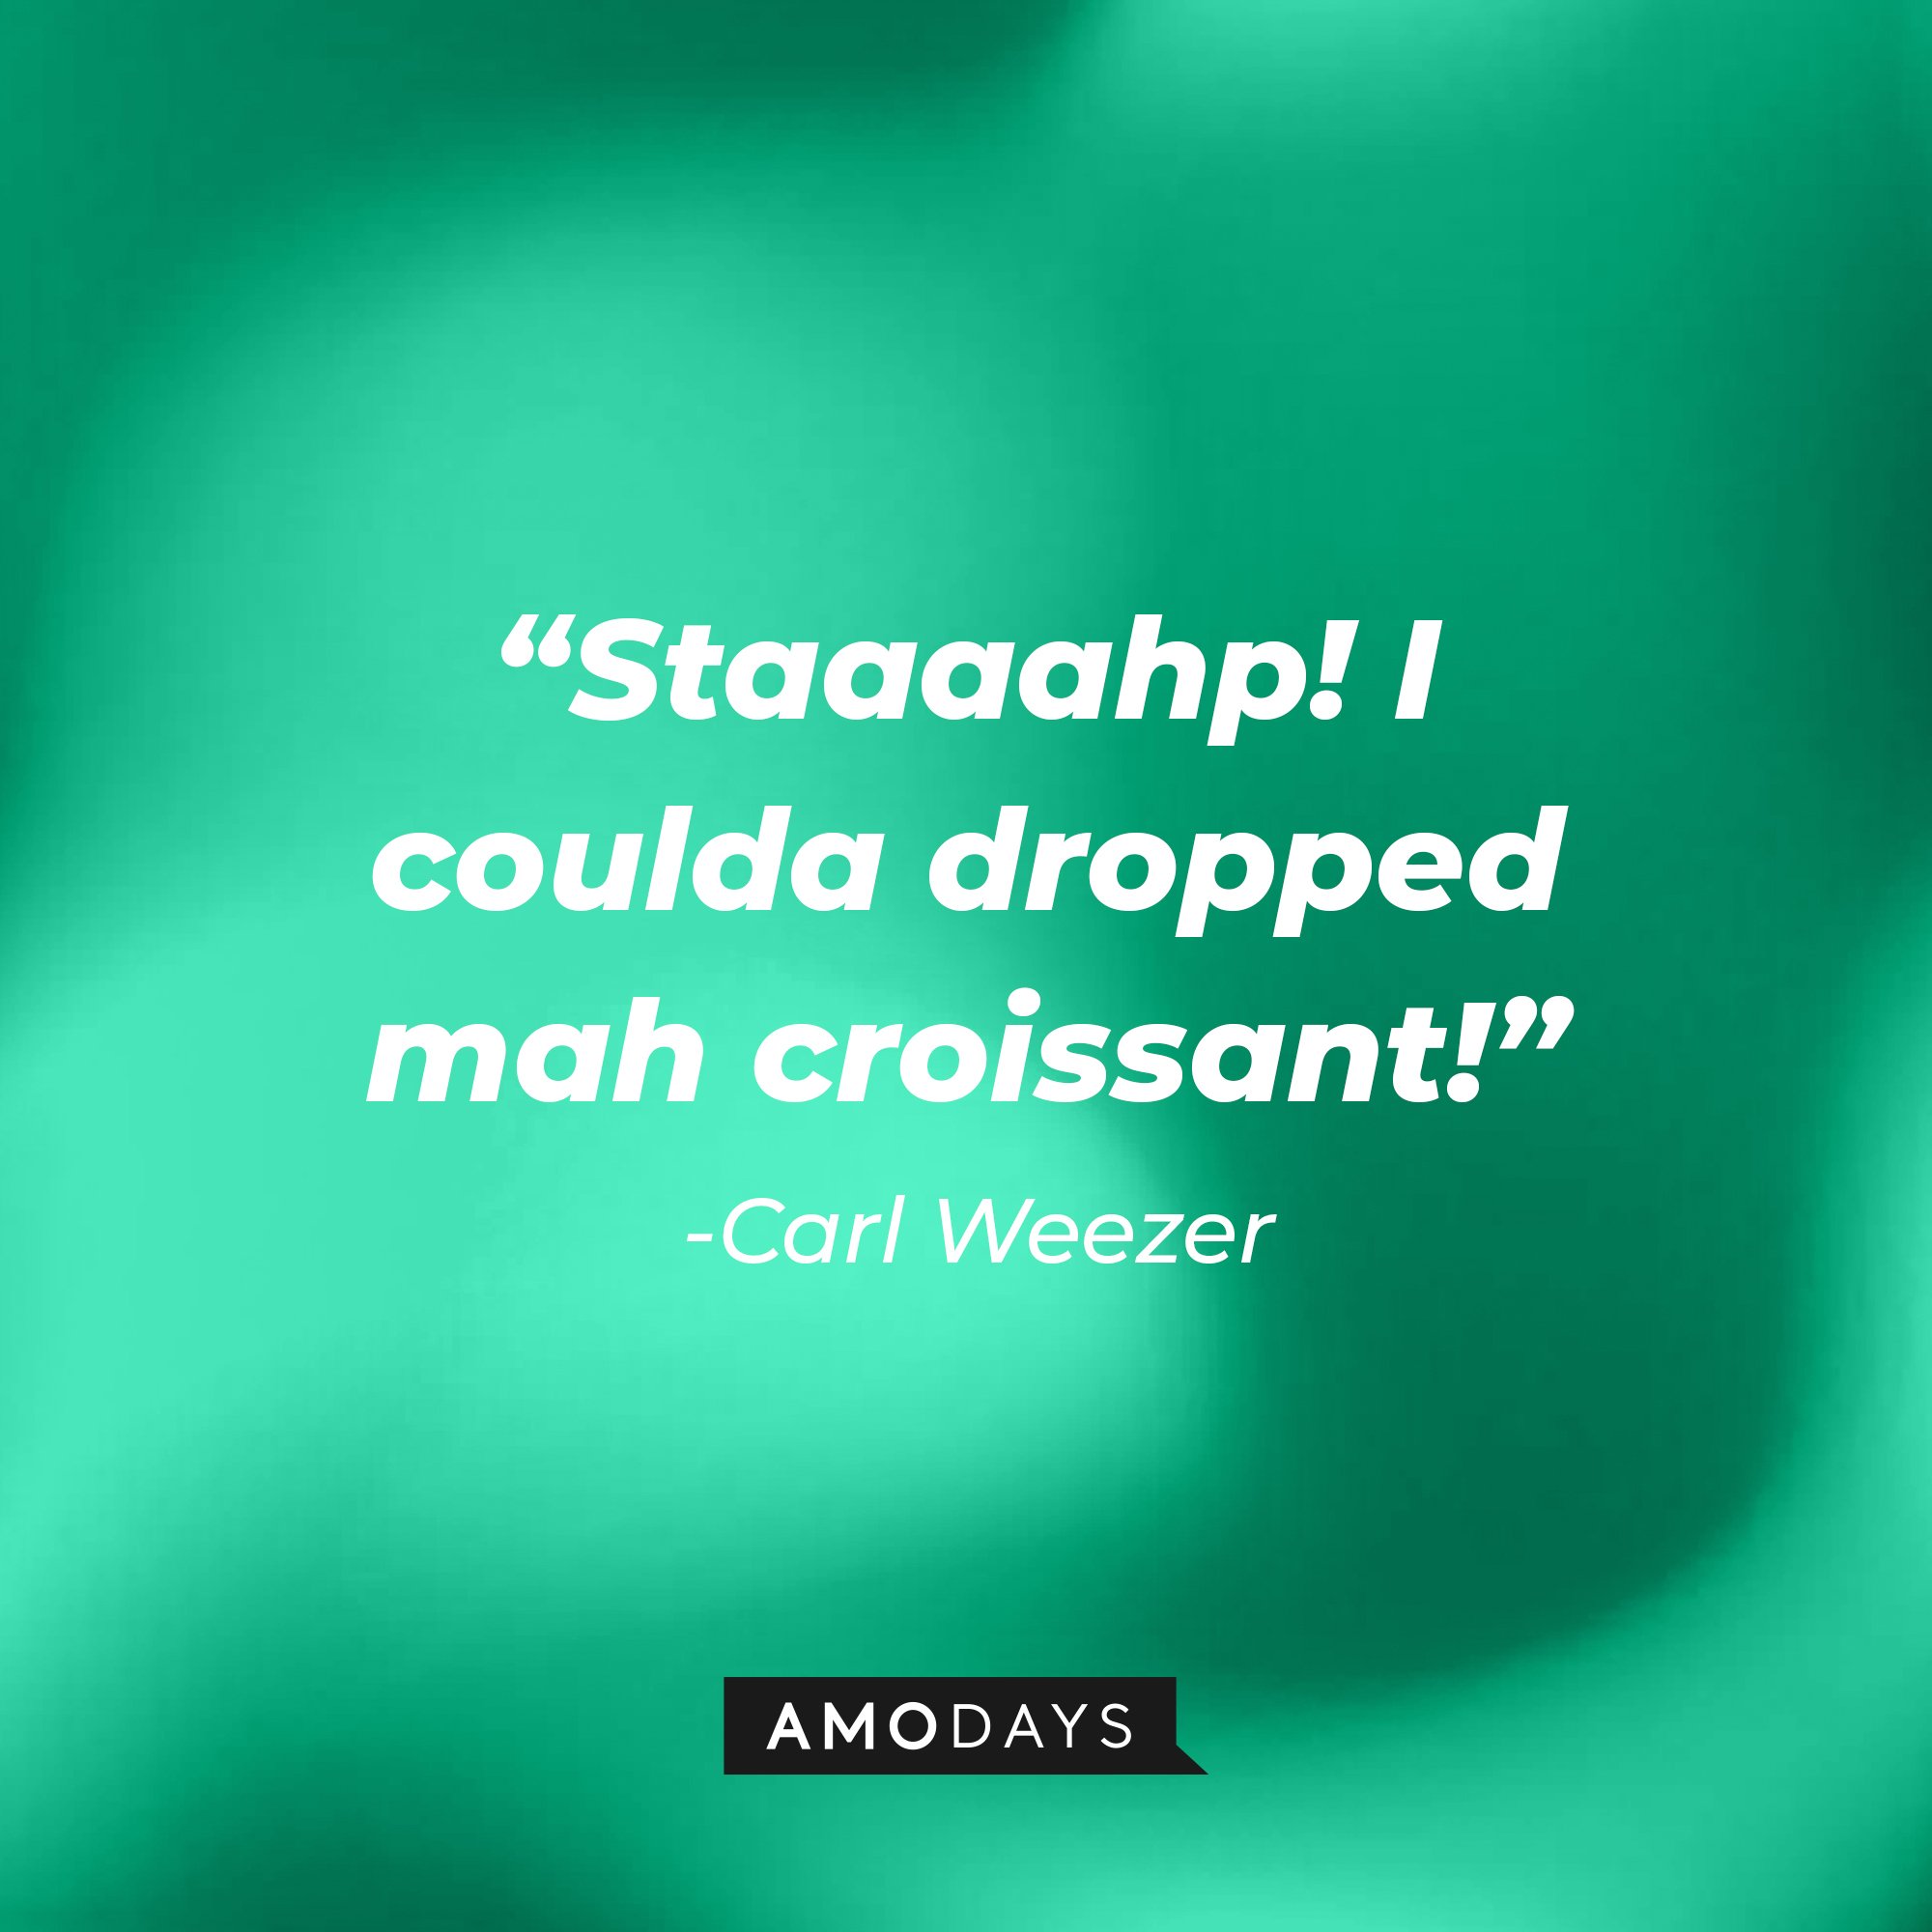 Carl Weezer's quote: “Staaaahp! I coulda dropped mah croissant!” | Image: AmoDays